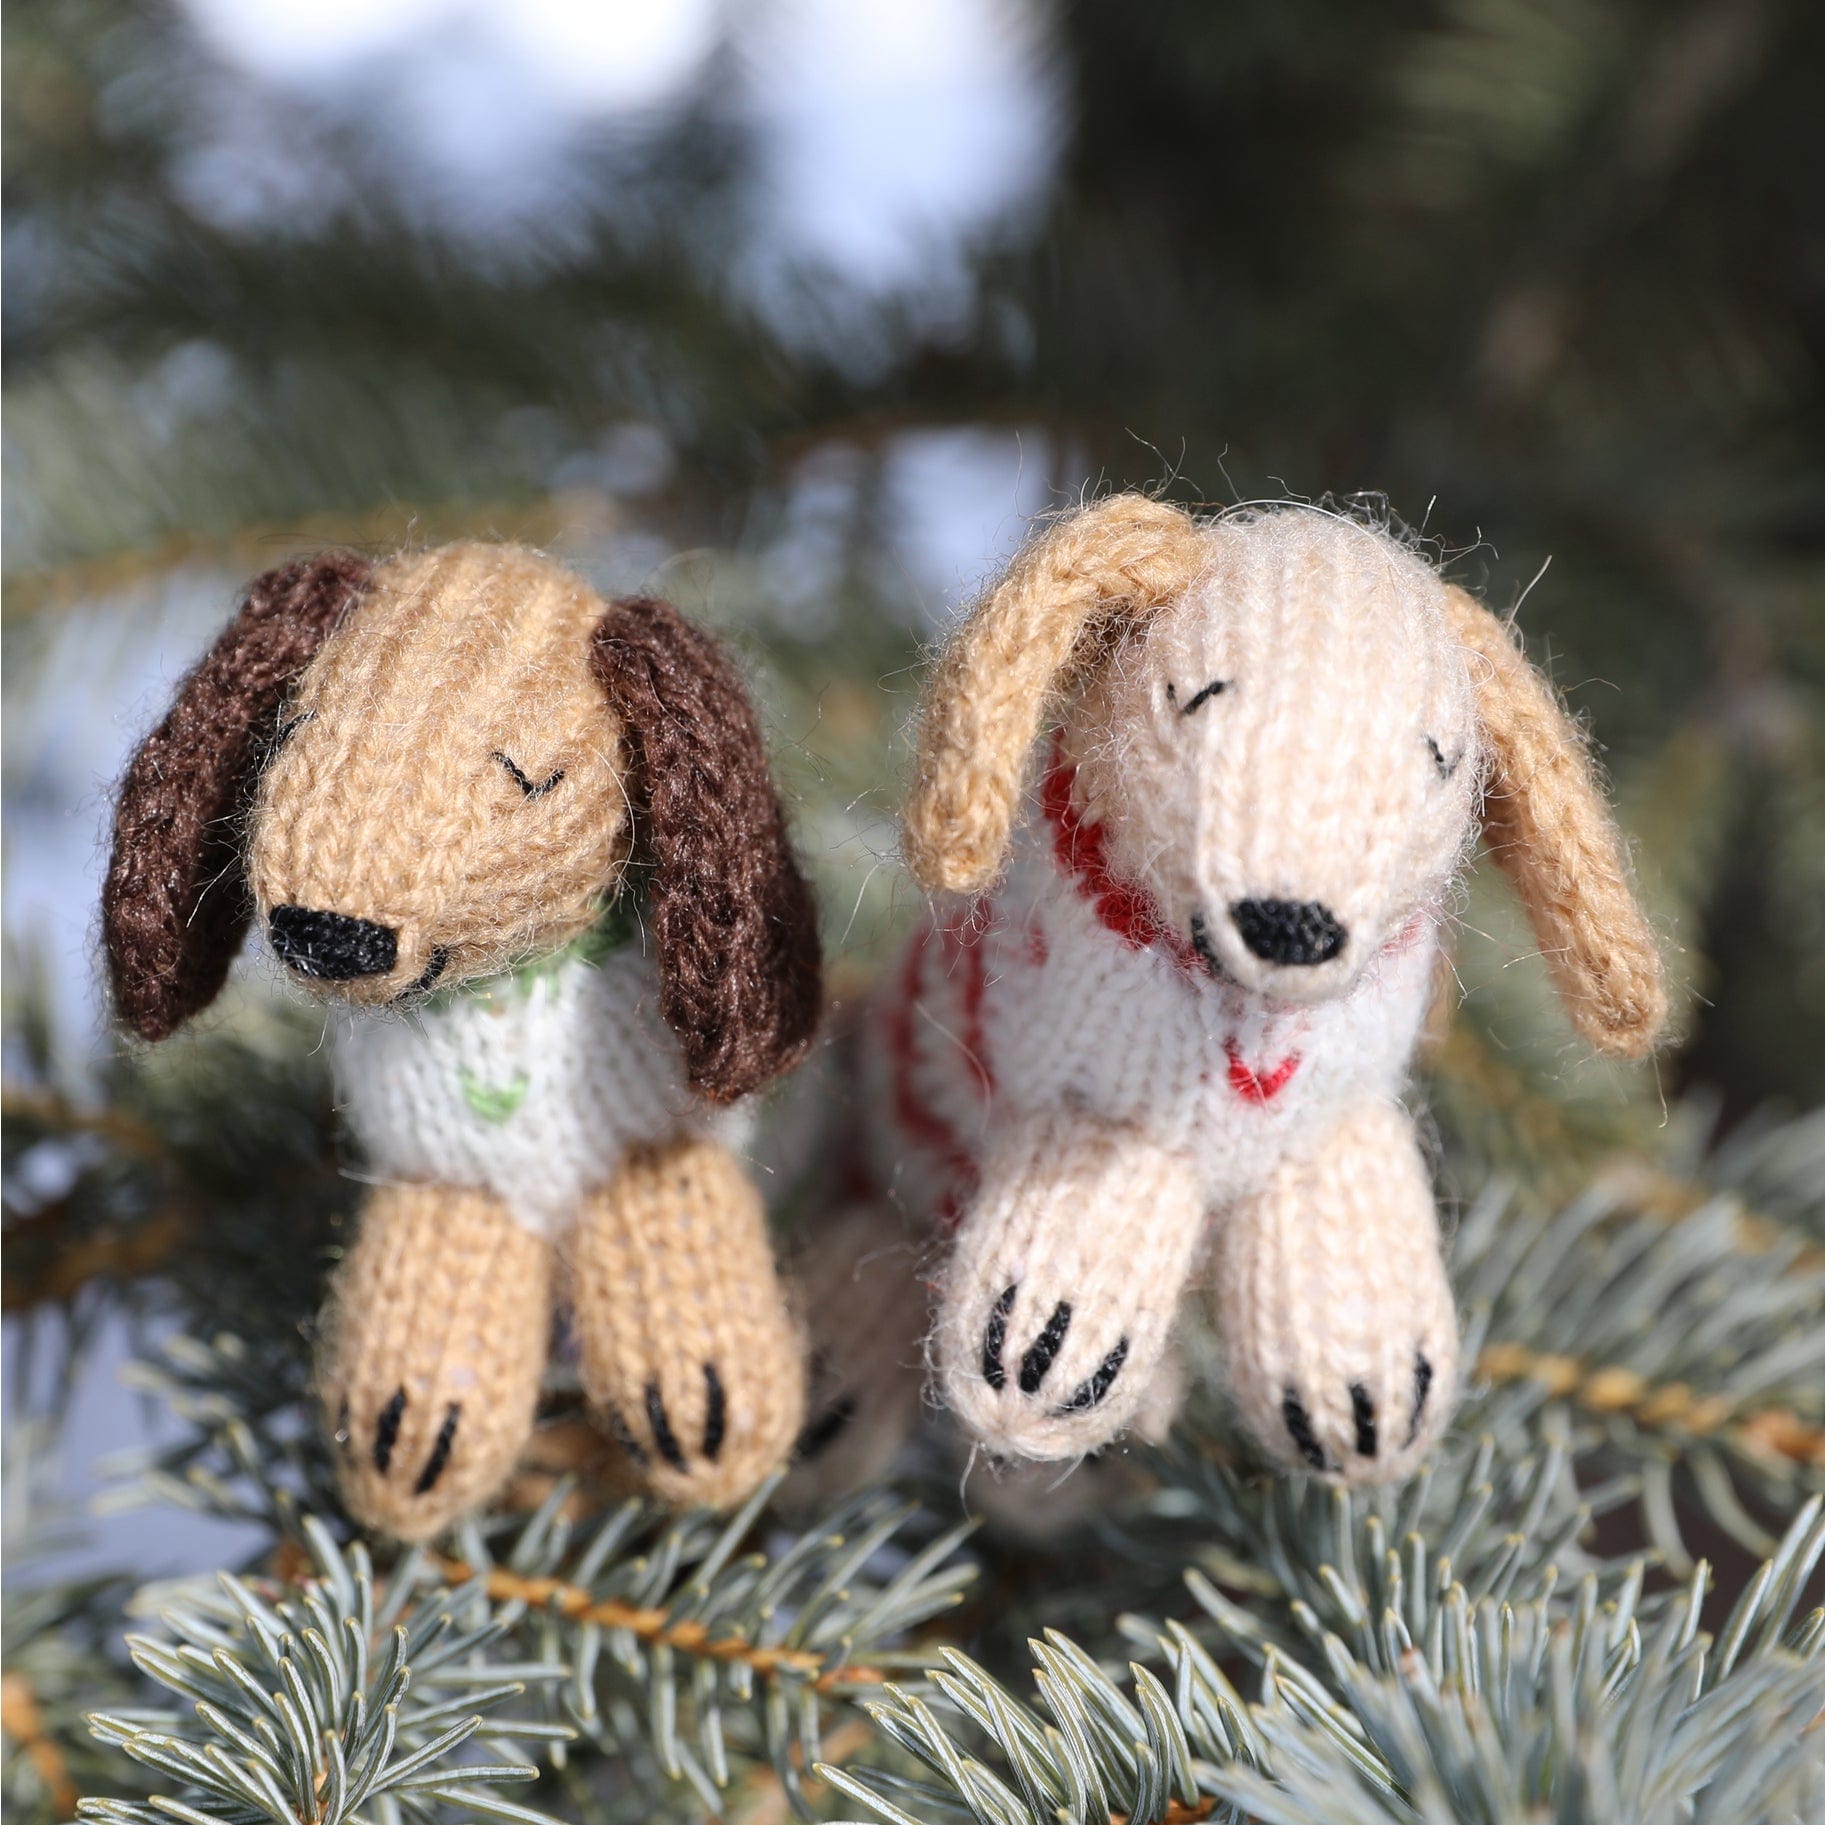 Dachshund in Holiday Sweater Ornament-Handmade in Peru - The Pink Pigs, A Compassionate Boutique